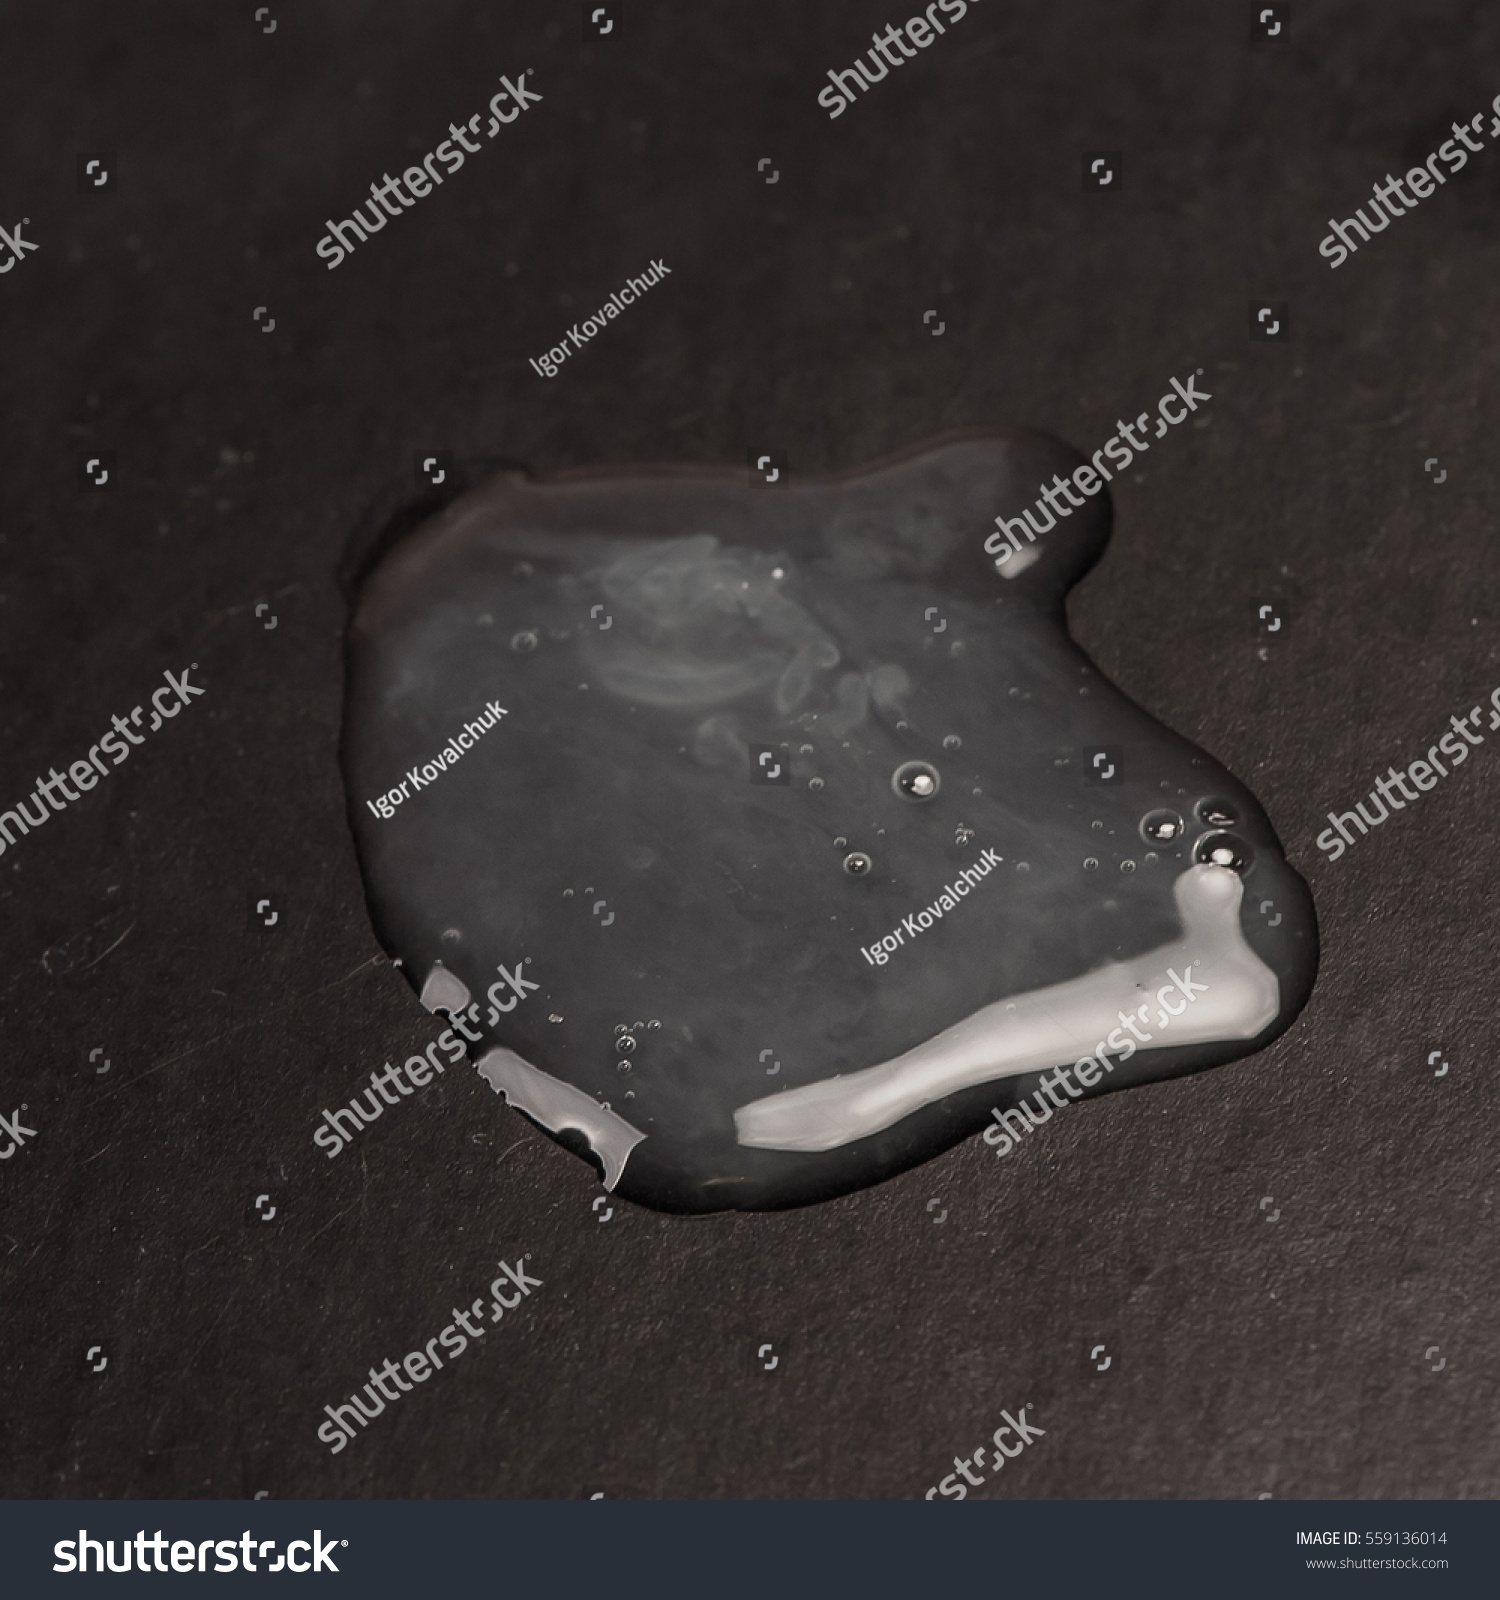 Real Sperm Puddle On Black Background Stock Photo Shutterstock